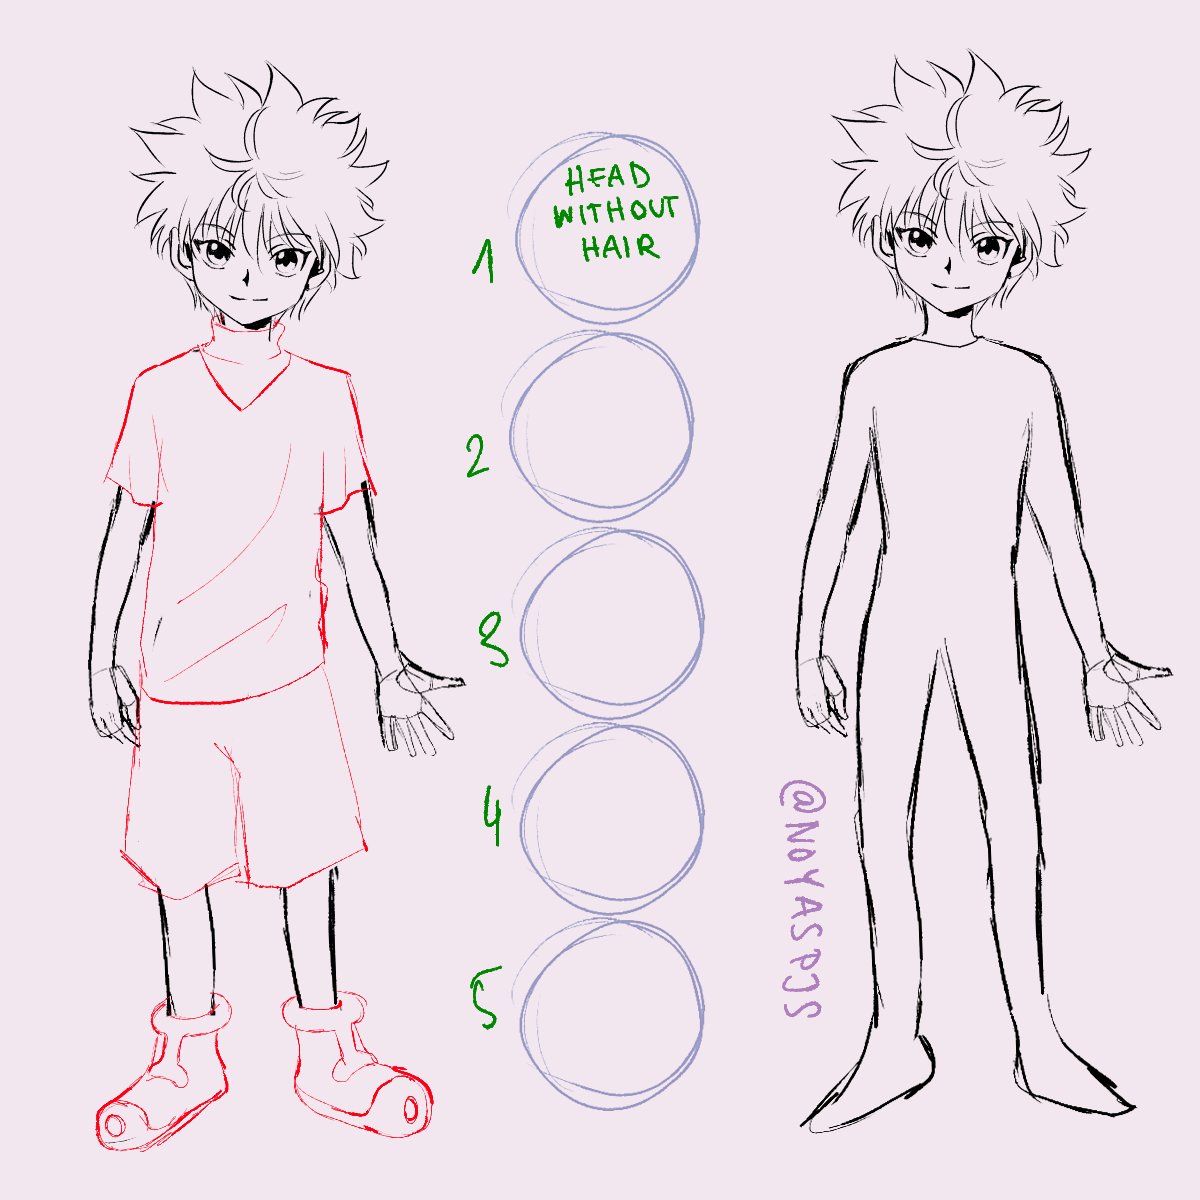 (2/3) how to draw your own adorable killua!! Also lmk if this helps u or u need anything else explained 